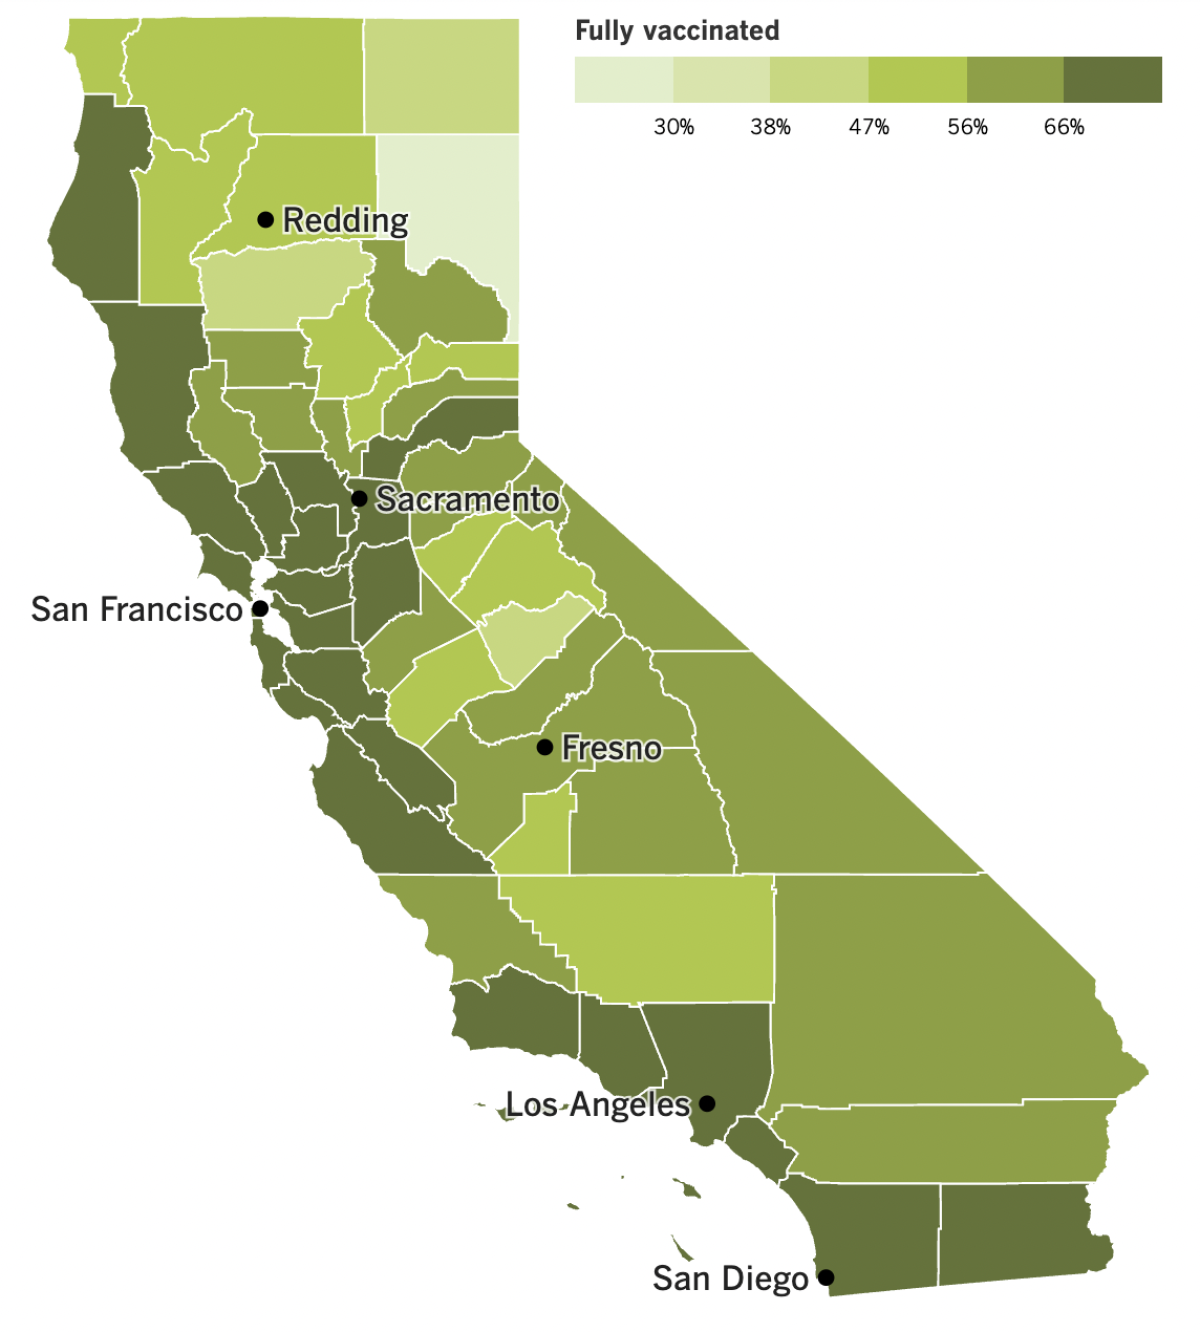 A map showing California's COVID-19 vaccination progress by county as of Nov. 1, 2022.